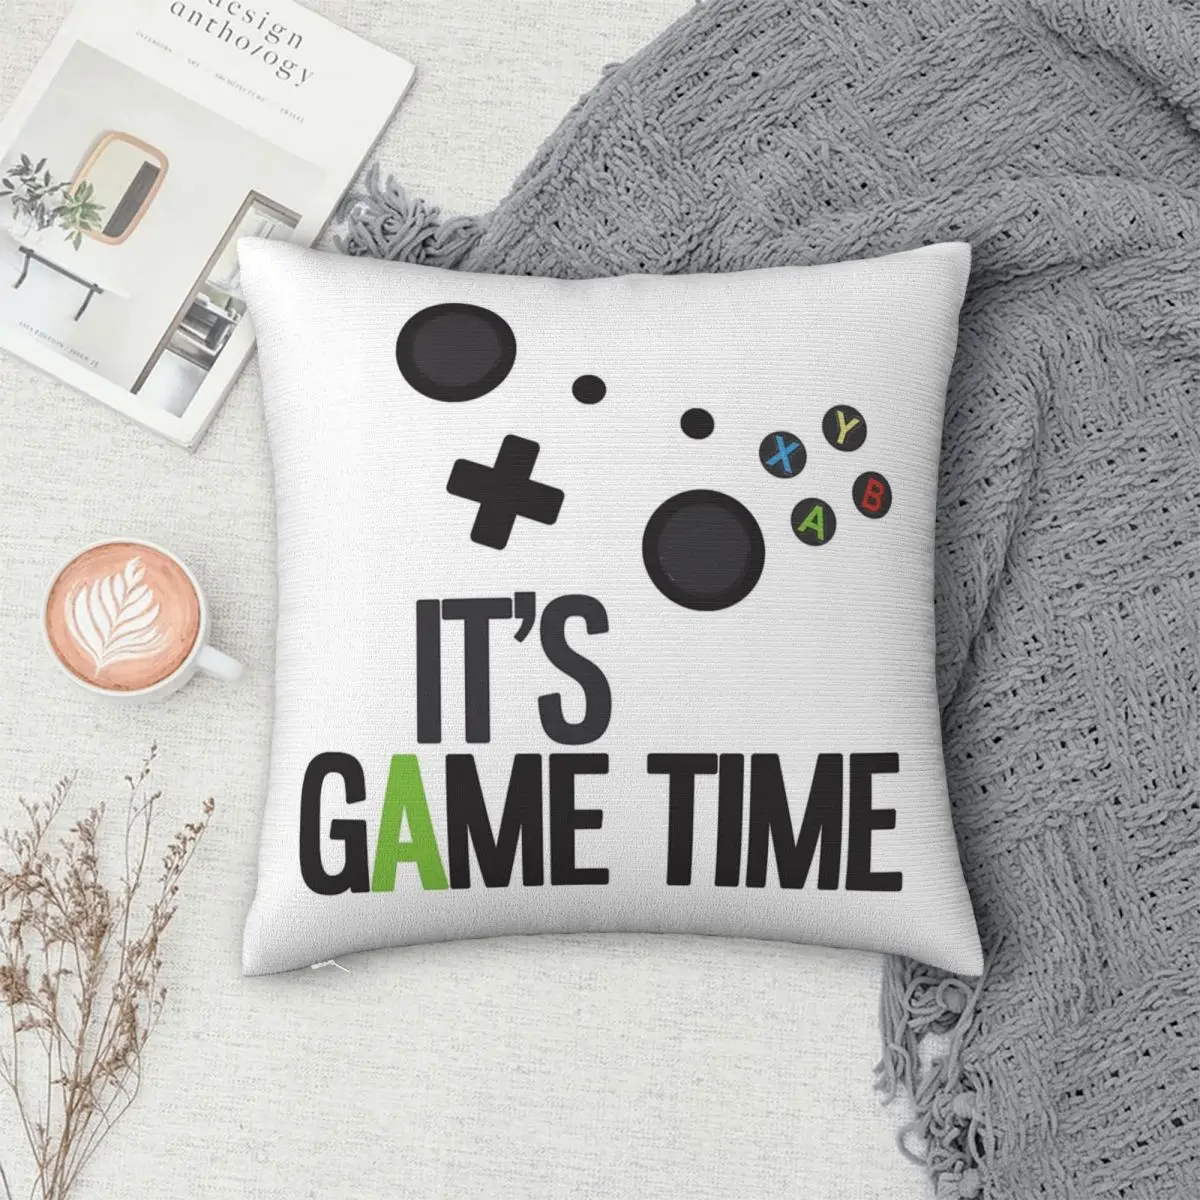 

It's Game Time Pillowcase Polyester Pillows Cover Cushion Comfort Throw Pillow Sofa Decorative Cushions Used for Home Bedroom